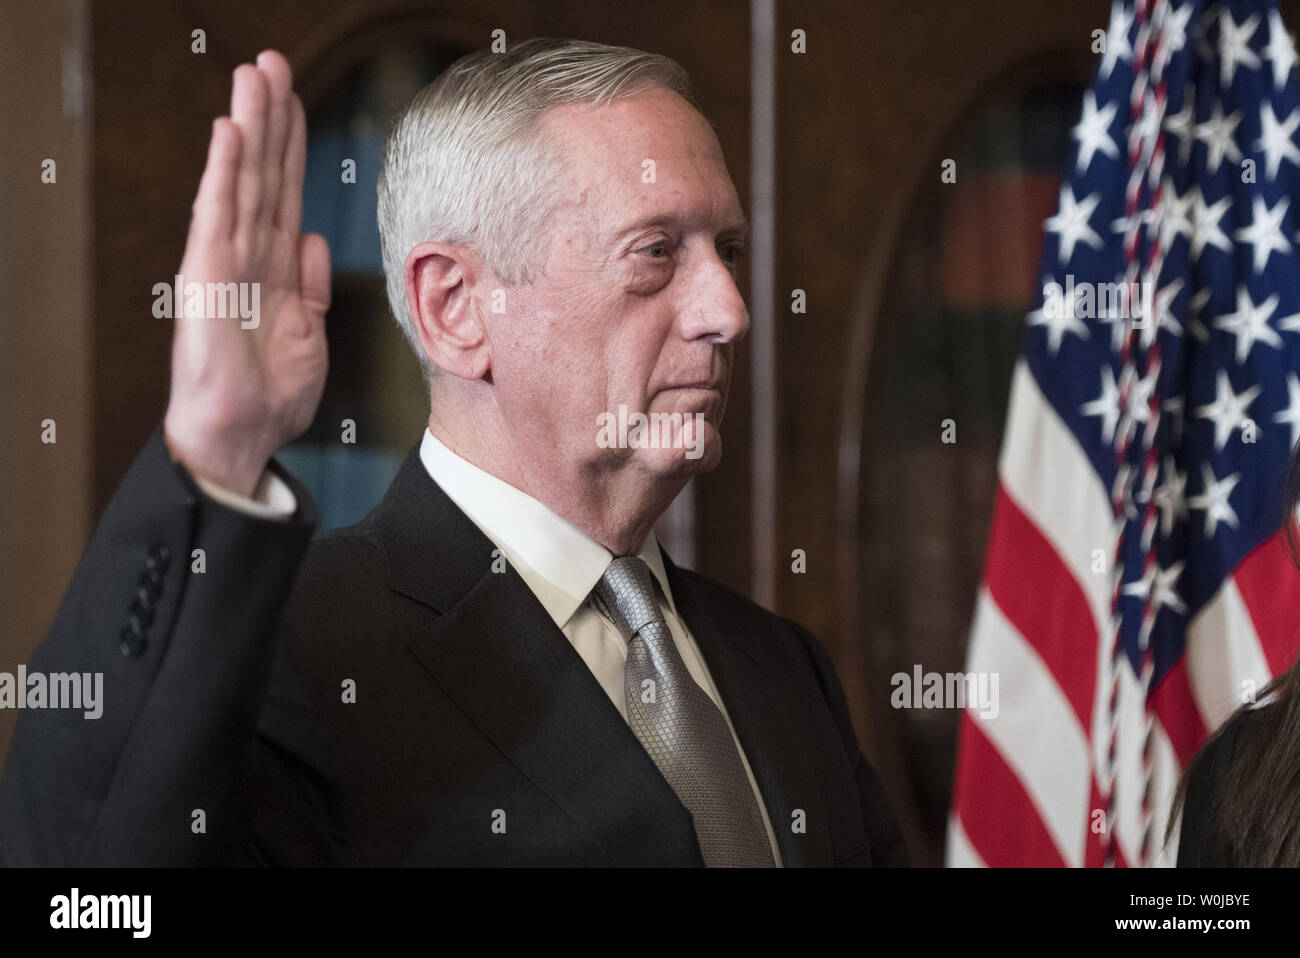 Marine Corps General James Mattis is sworn-in as Defense Secretary by Vice President Mike Pence (not pictures), in the Vice Presidential ceremonial office in the Executive Office Building in Washington, D.C. on January 20, 2017. Photo by Kevin Dietsch/UPI Stock Photo